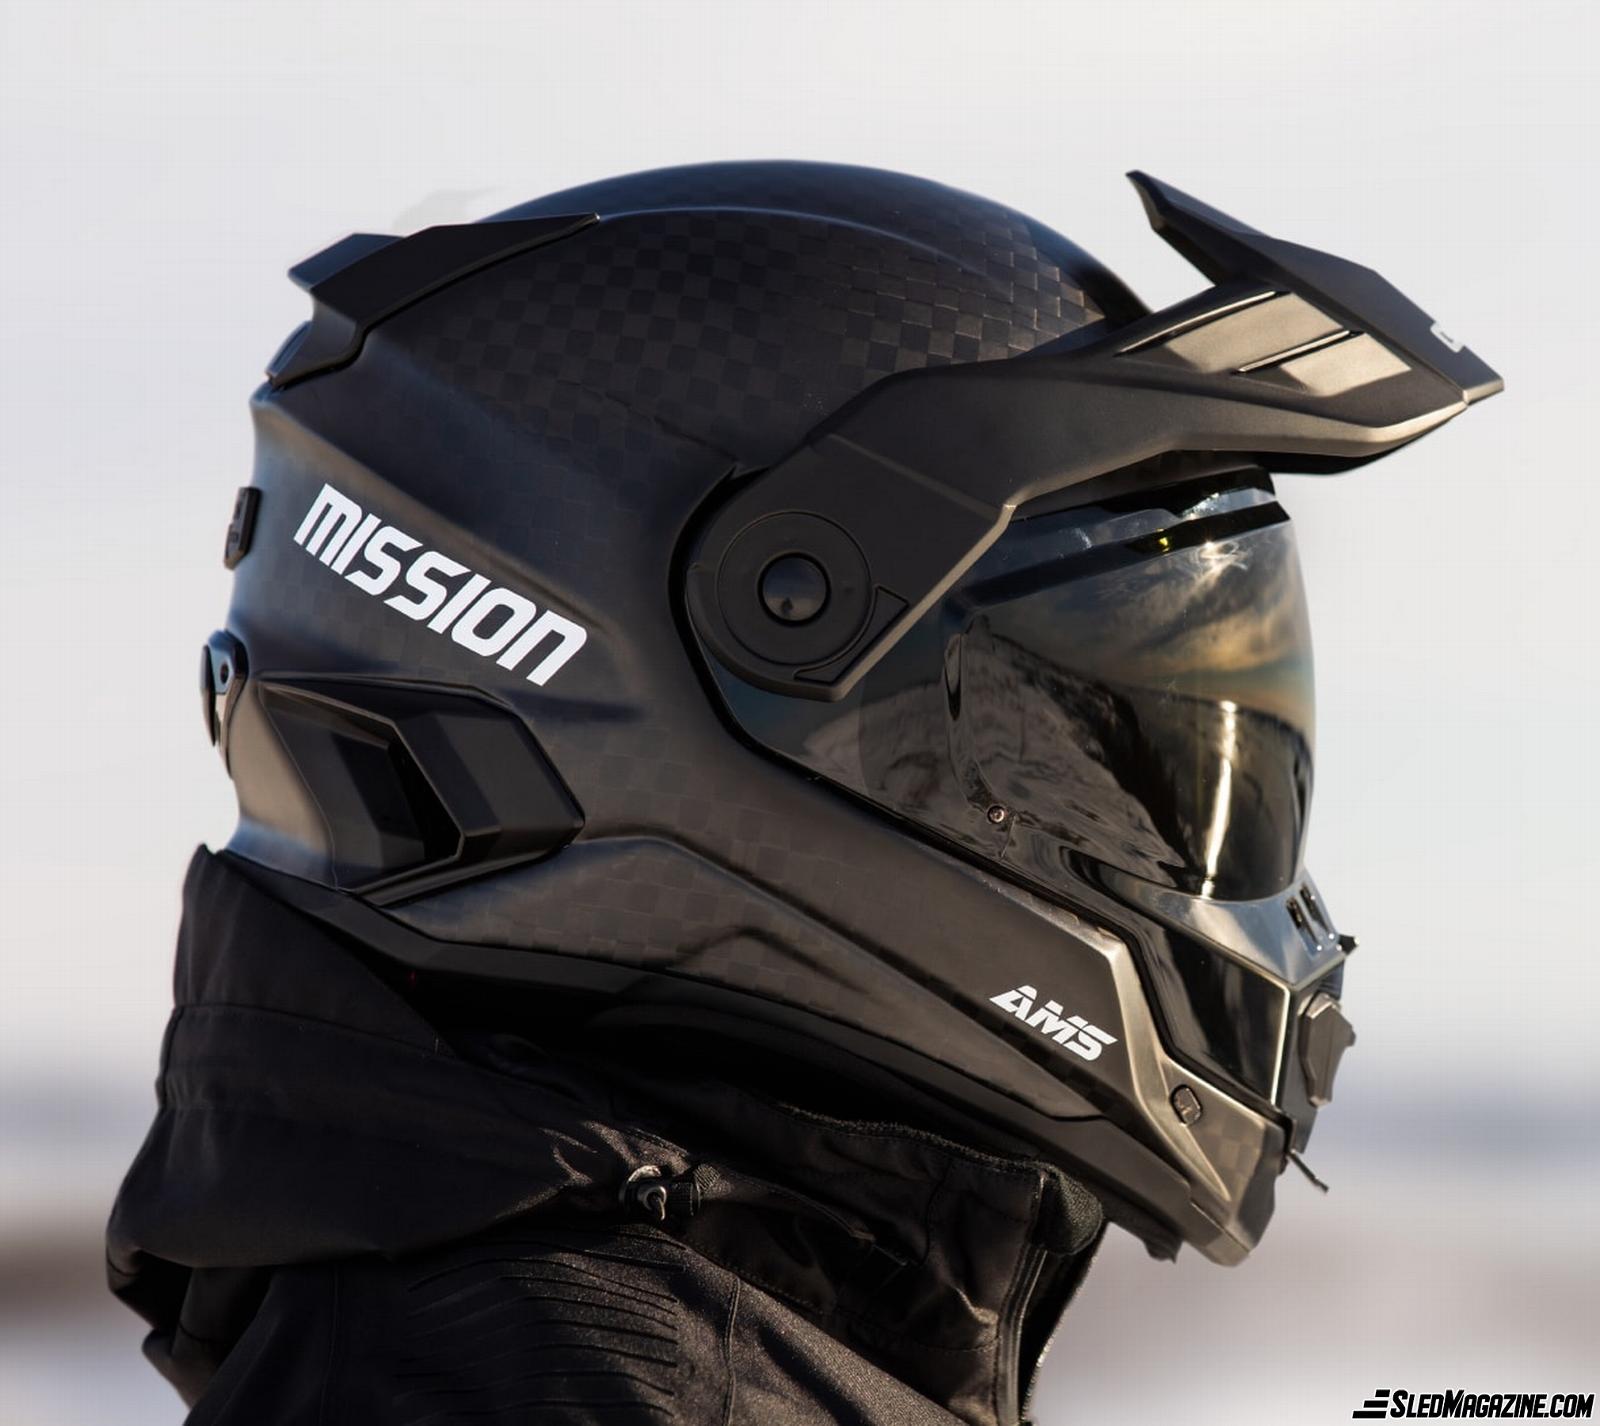 CKX Mission AMS Helmet - Have I finally found the perfect helmet for me? -  SledMagazine.com